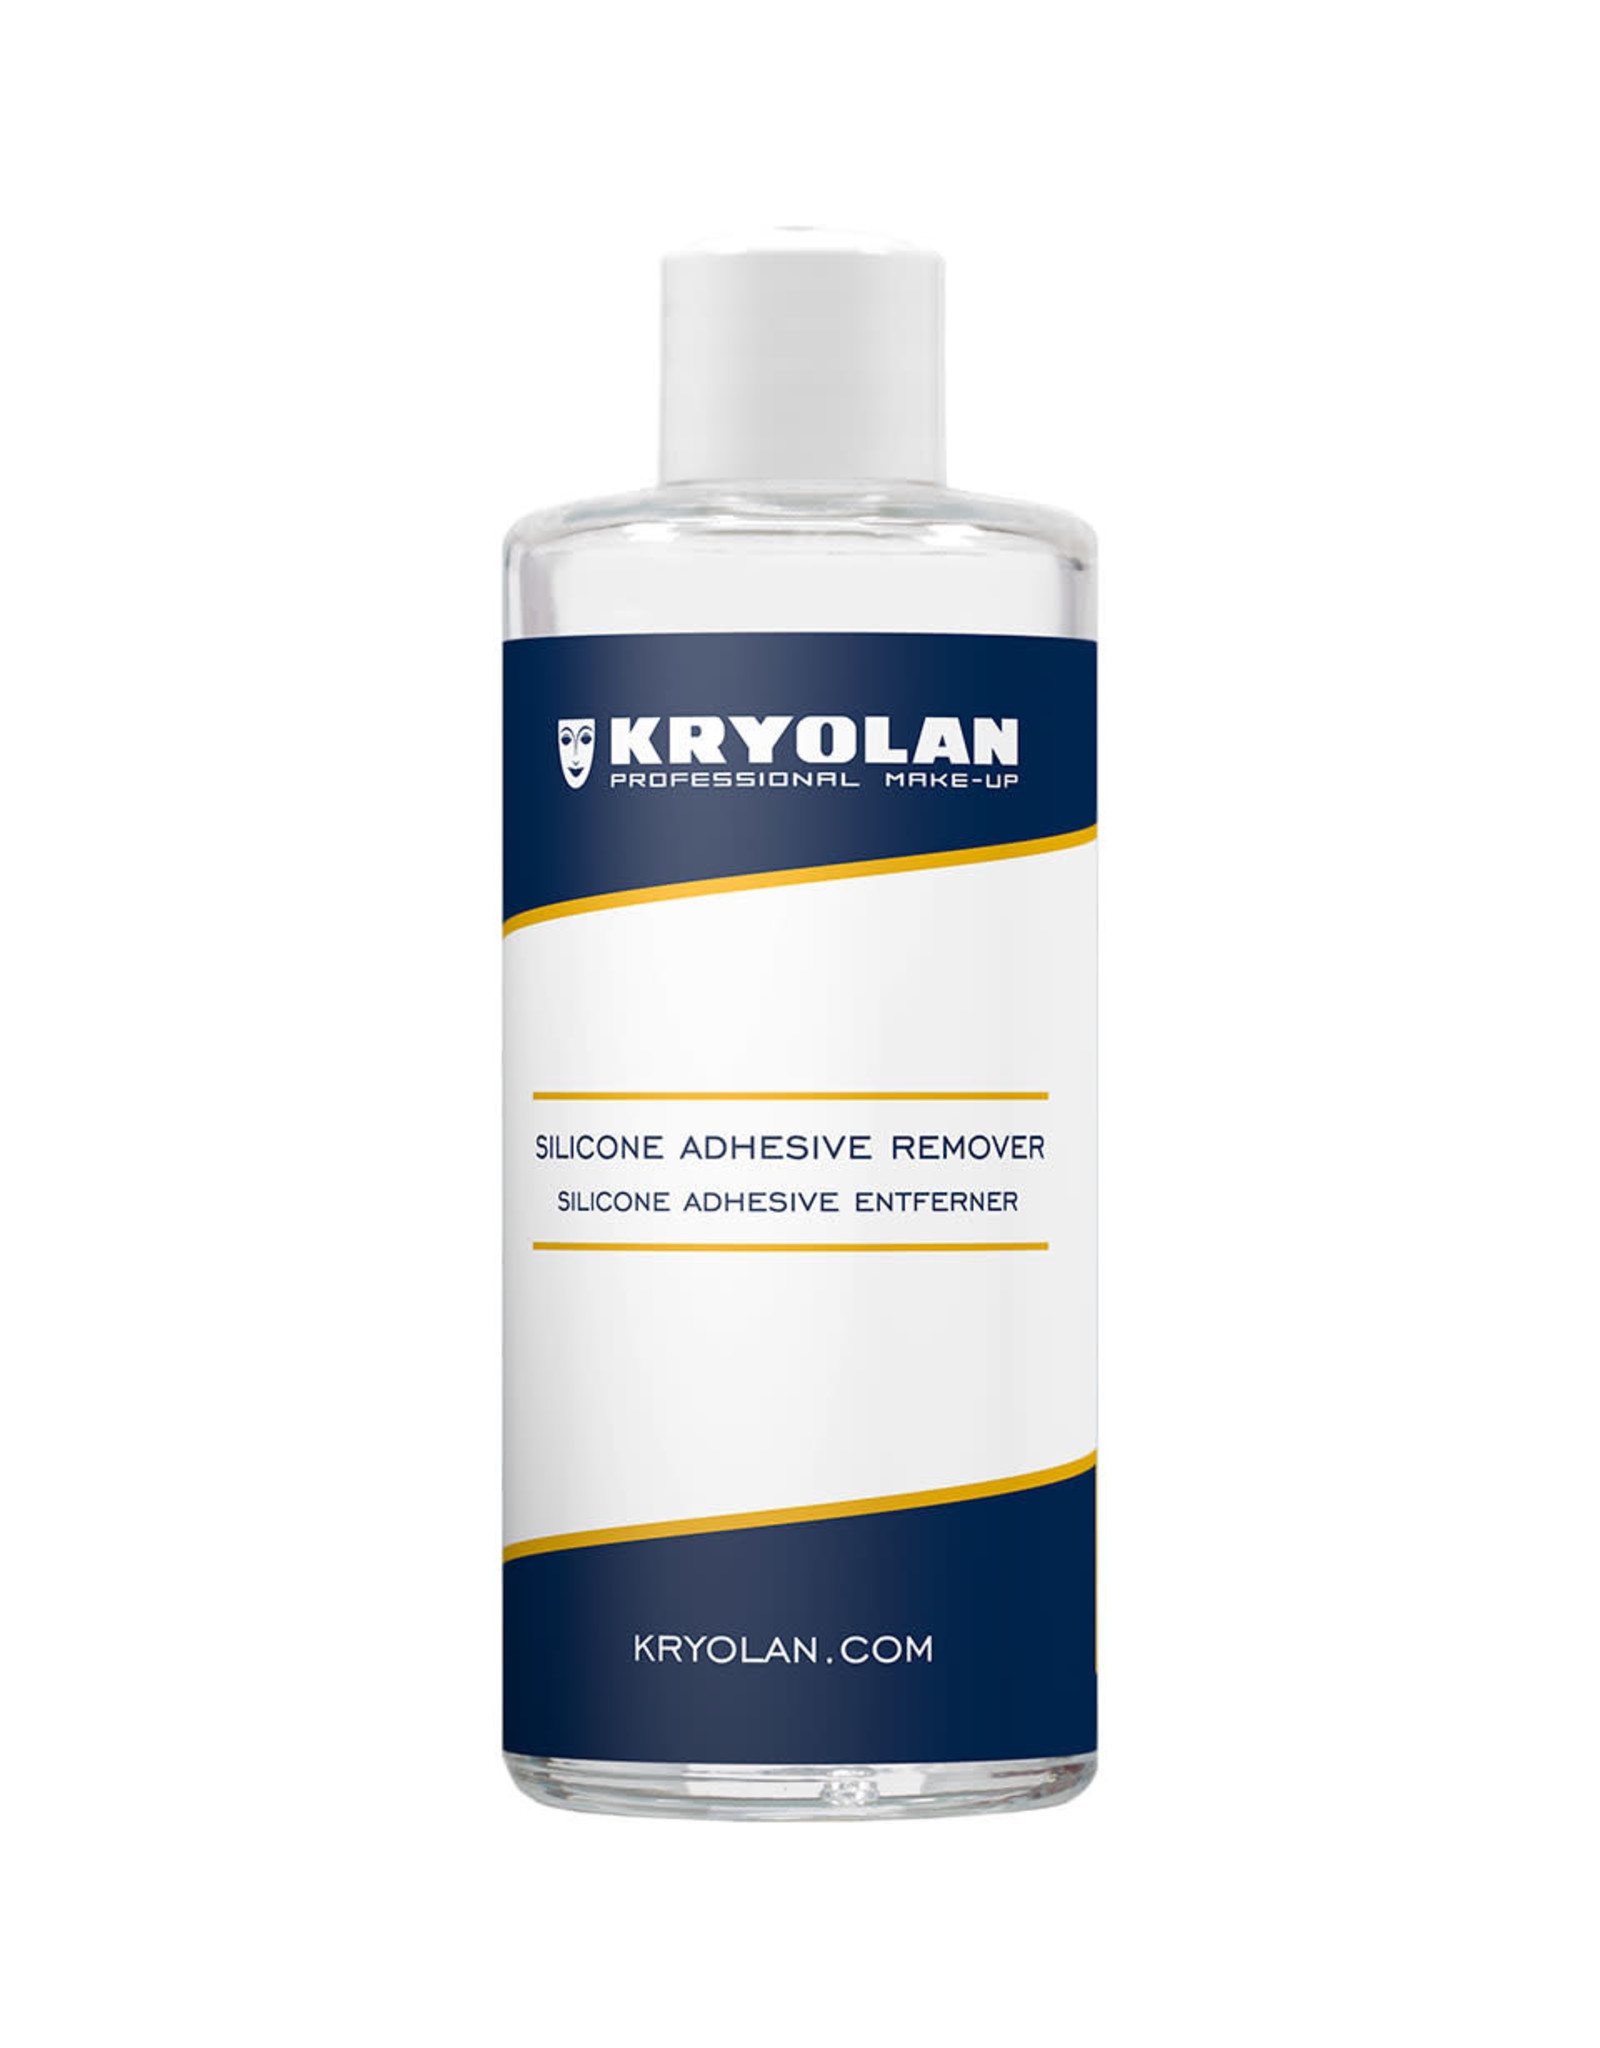 Kryolan Silicone Adhesive Remover